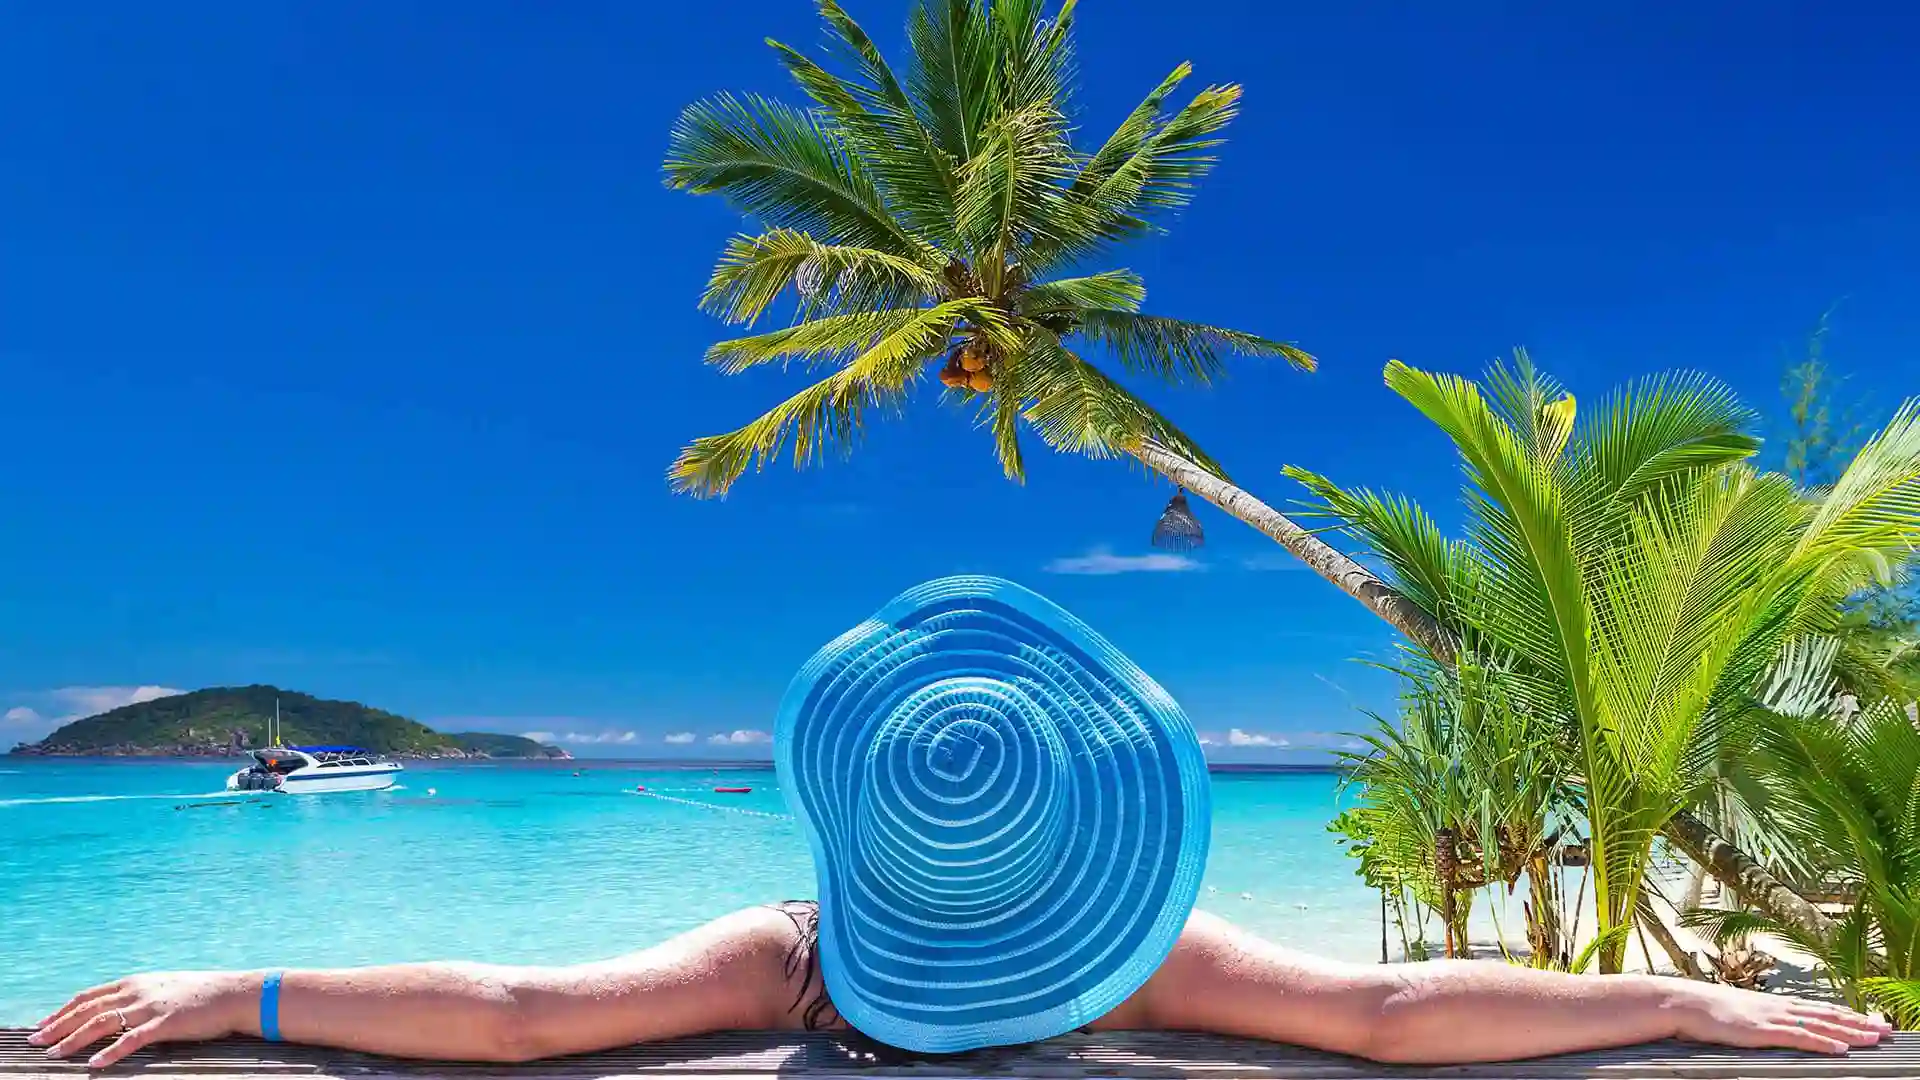 Person wearing blue hat looking out toward island waters and palm trees.